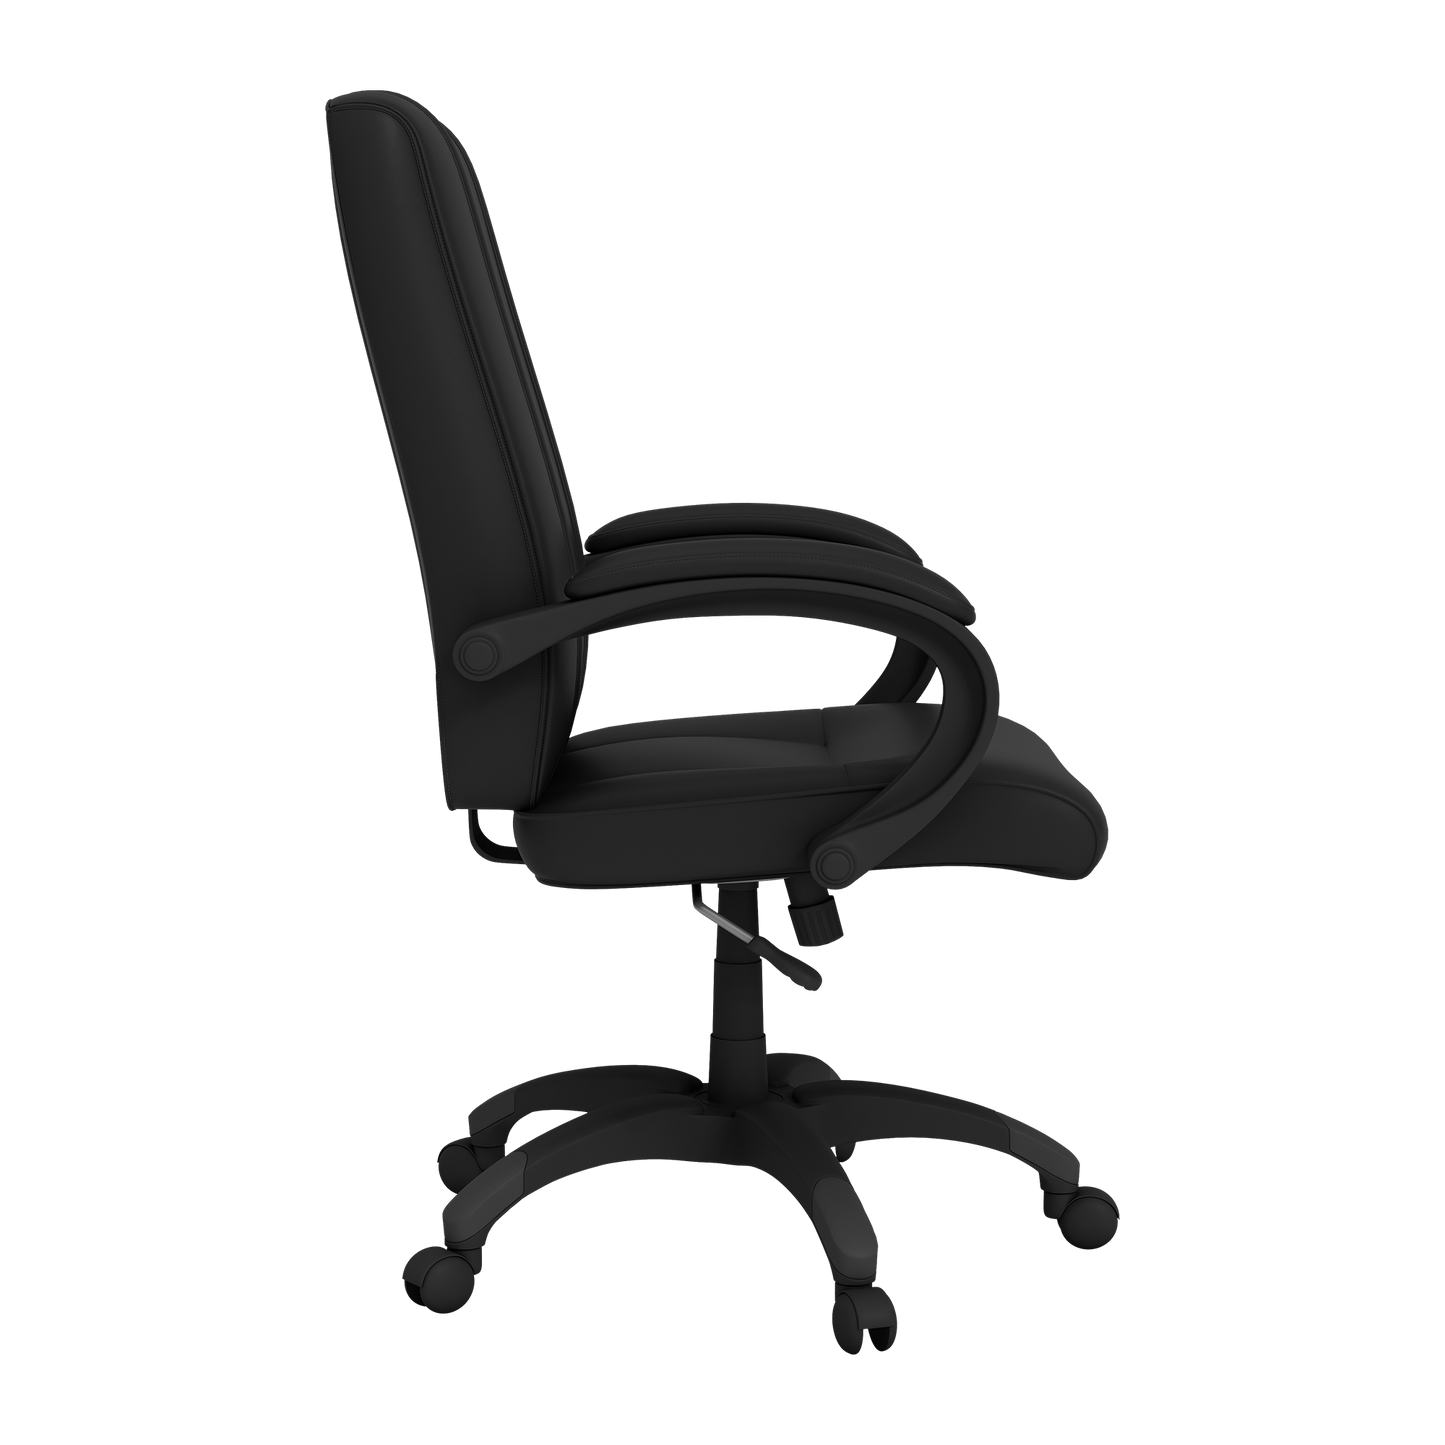 Office Chair 1000 with Colorado Rockies Secondary